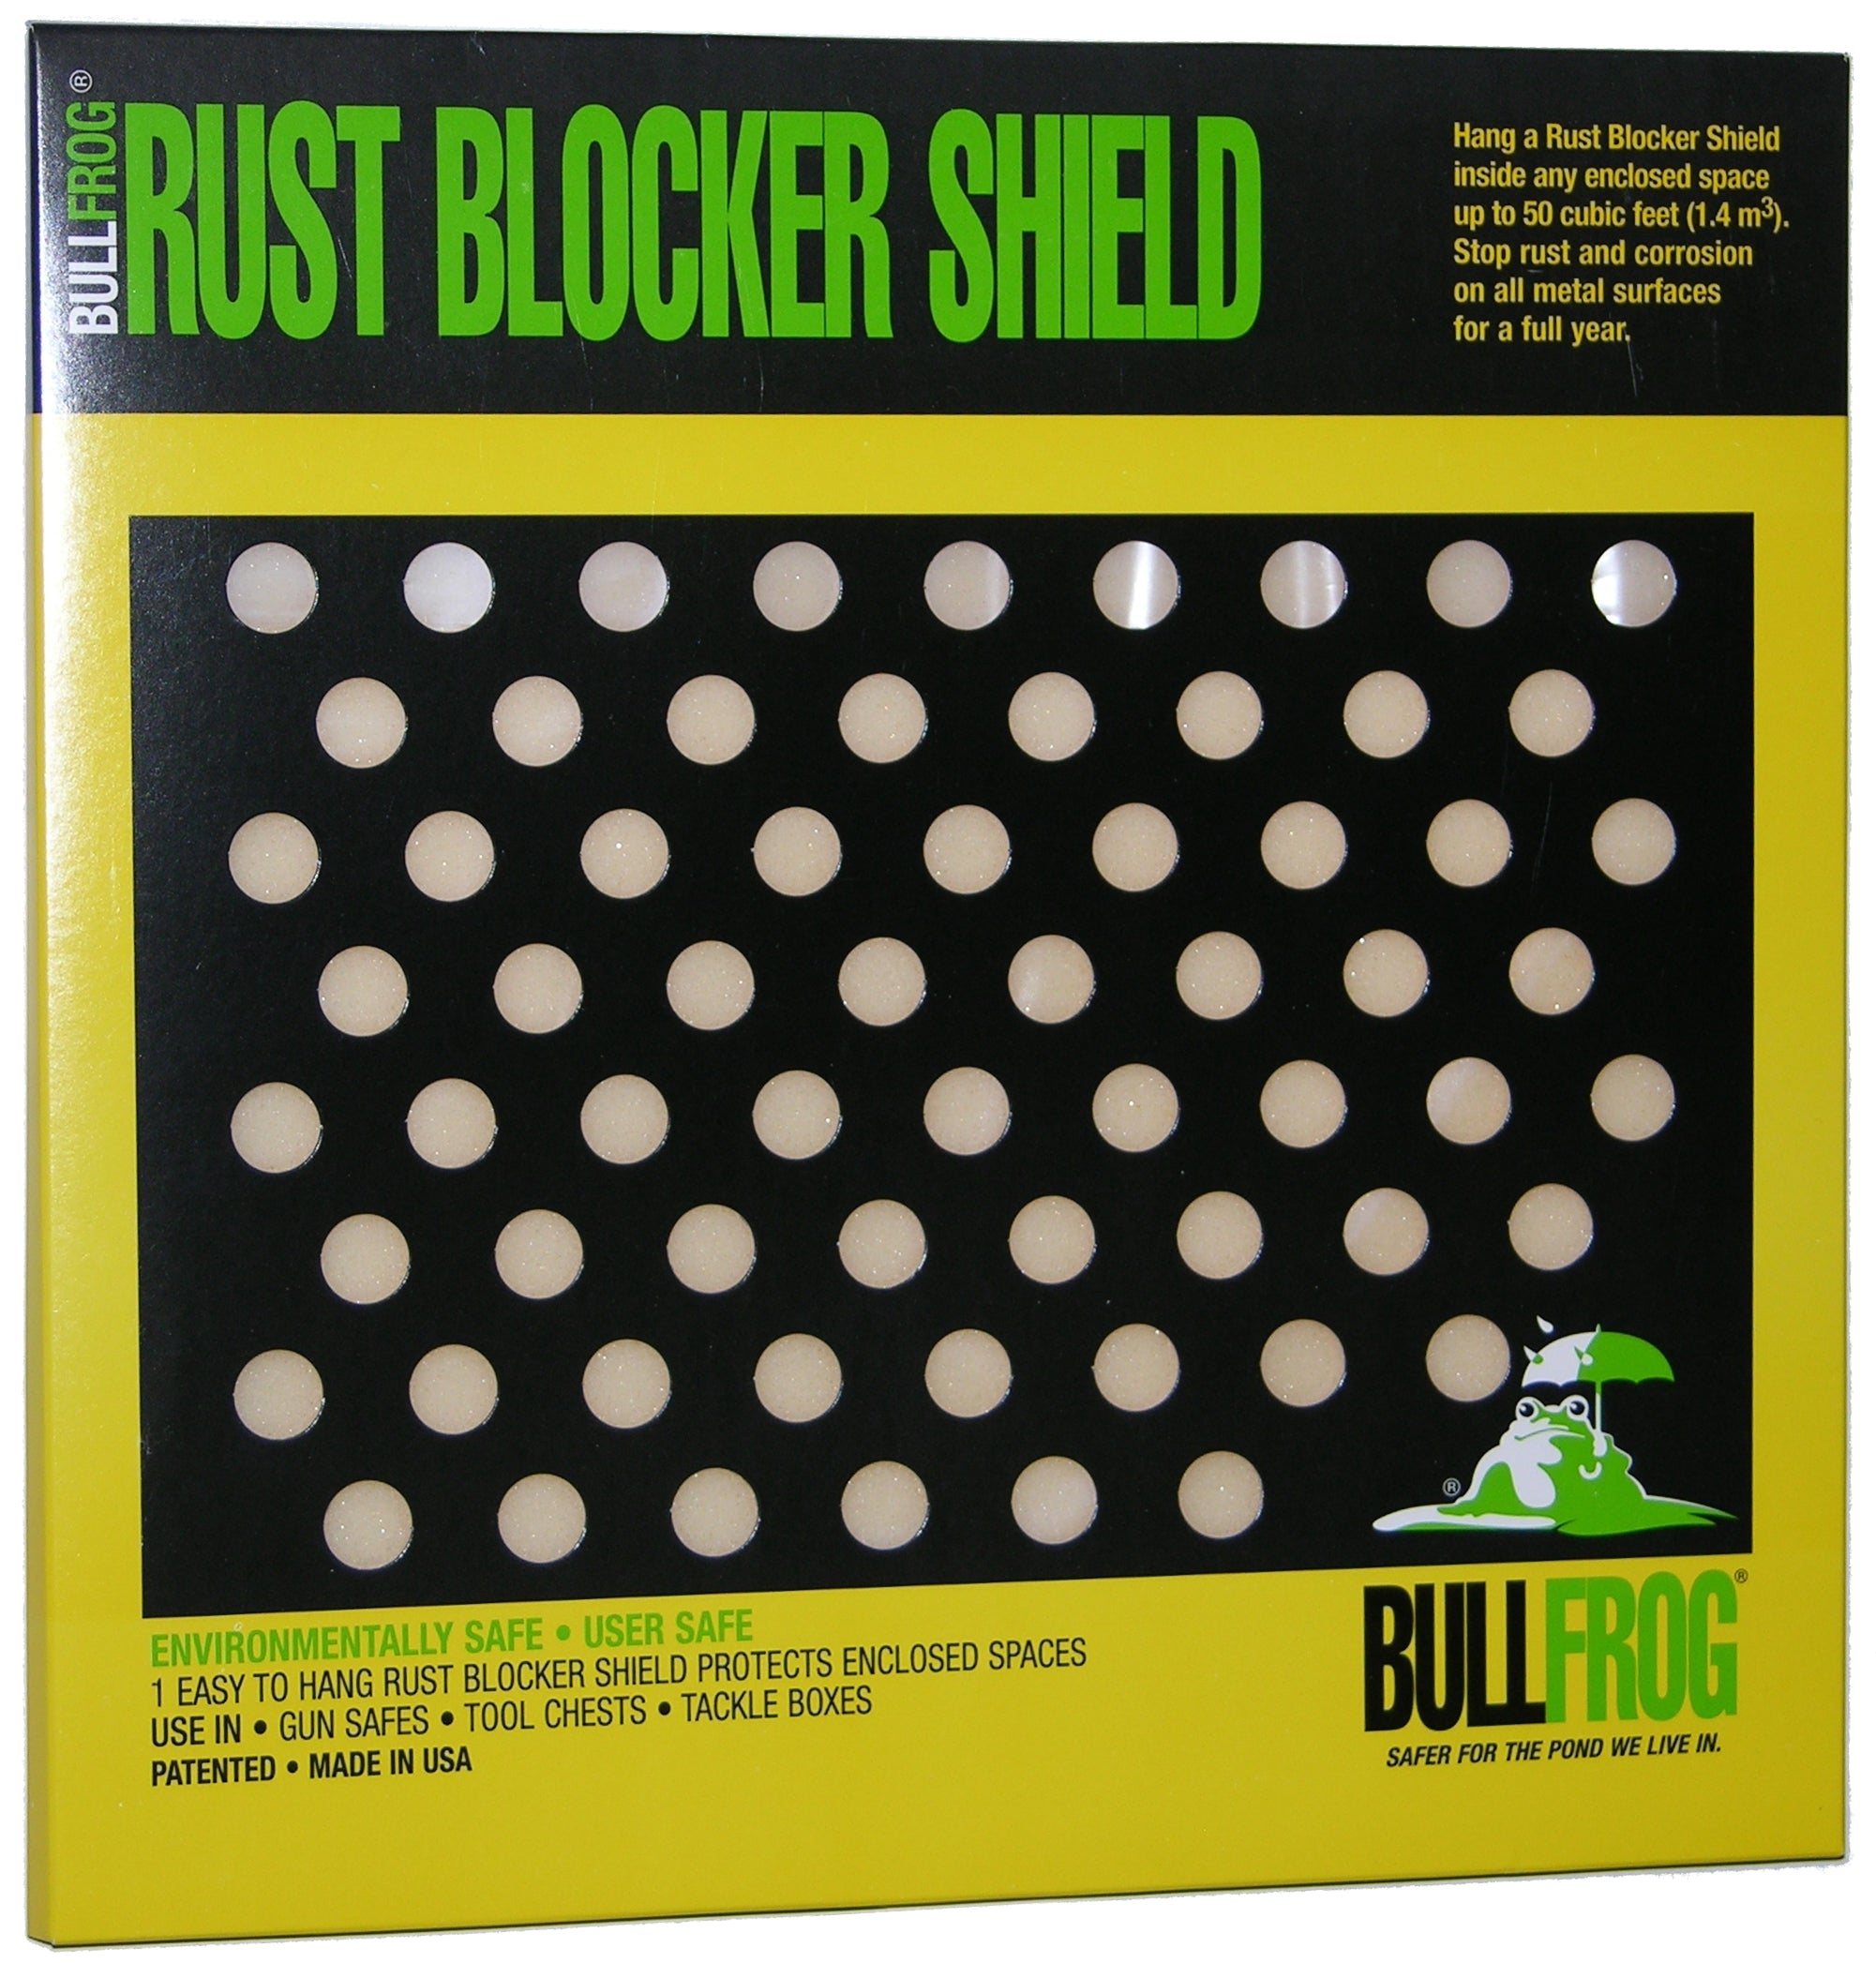 Bull Frog, Bull Frog 91321 Rust Blocker Emitter Shield Protects up to 50 Cu Ft Enclosed Space